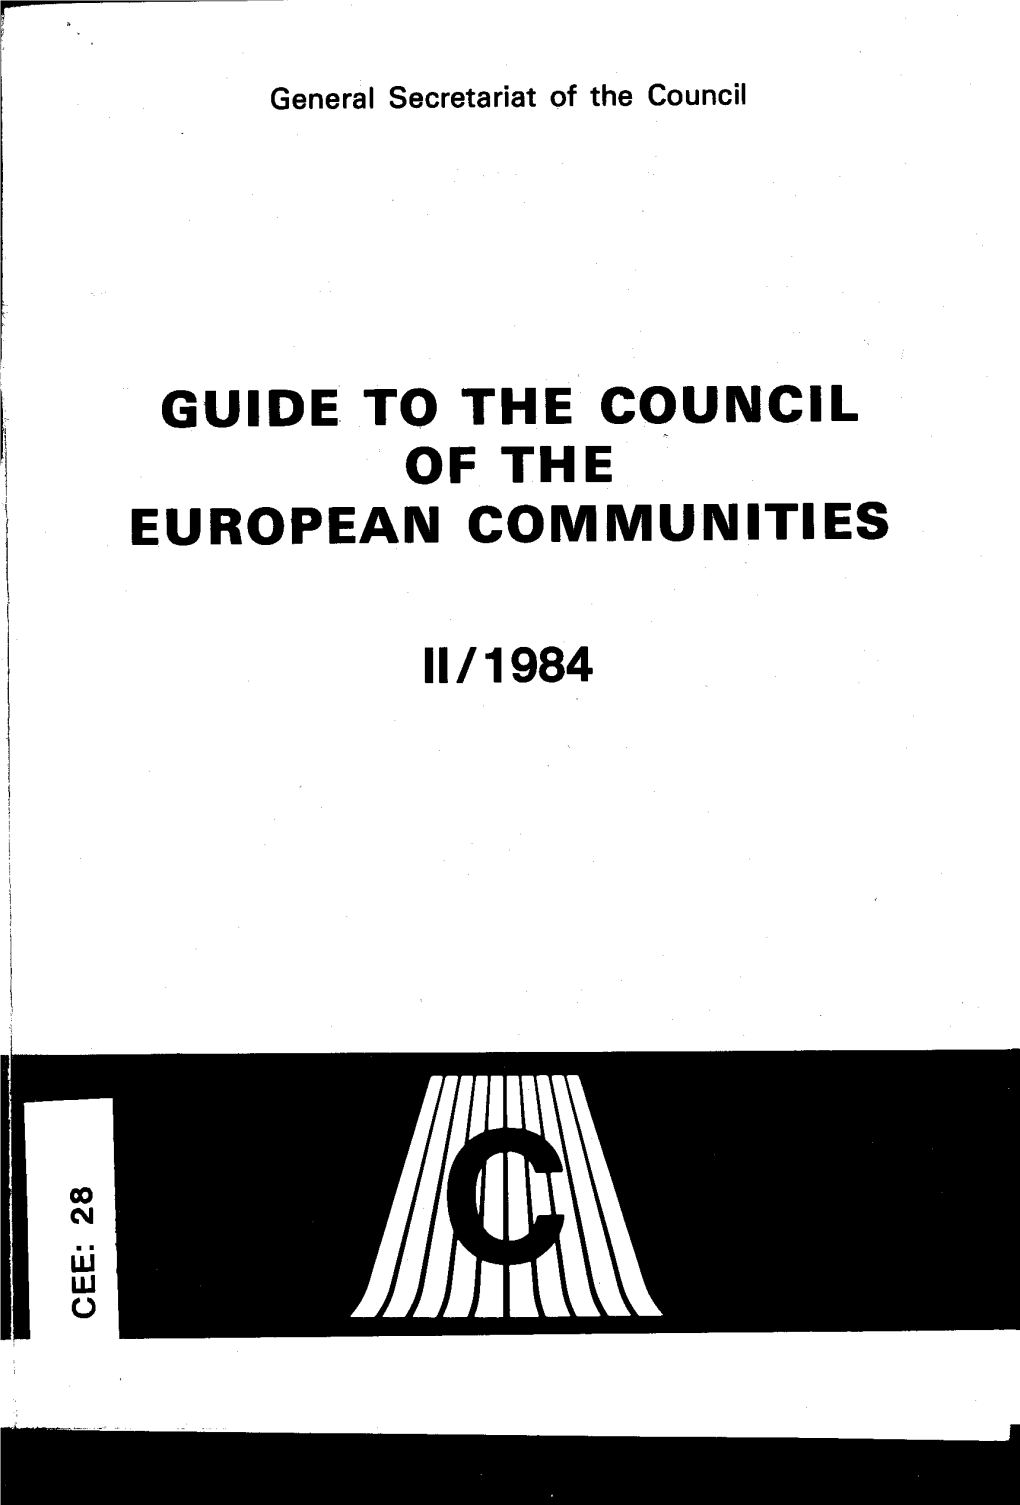 Guide to the Council of the European Communities